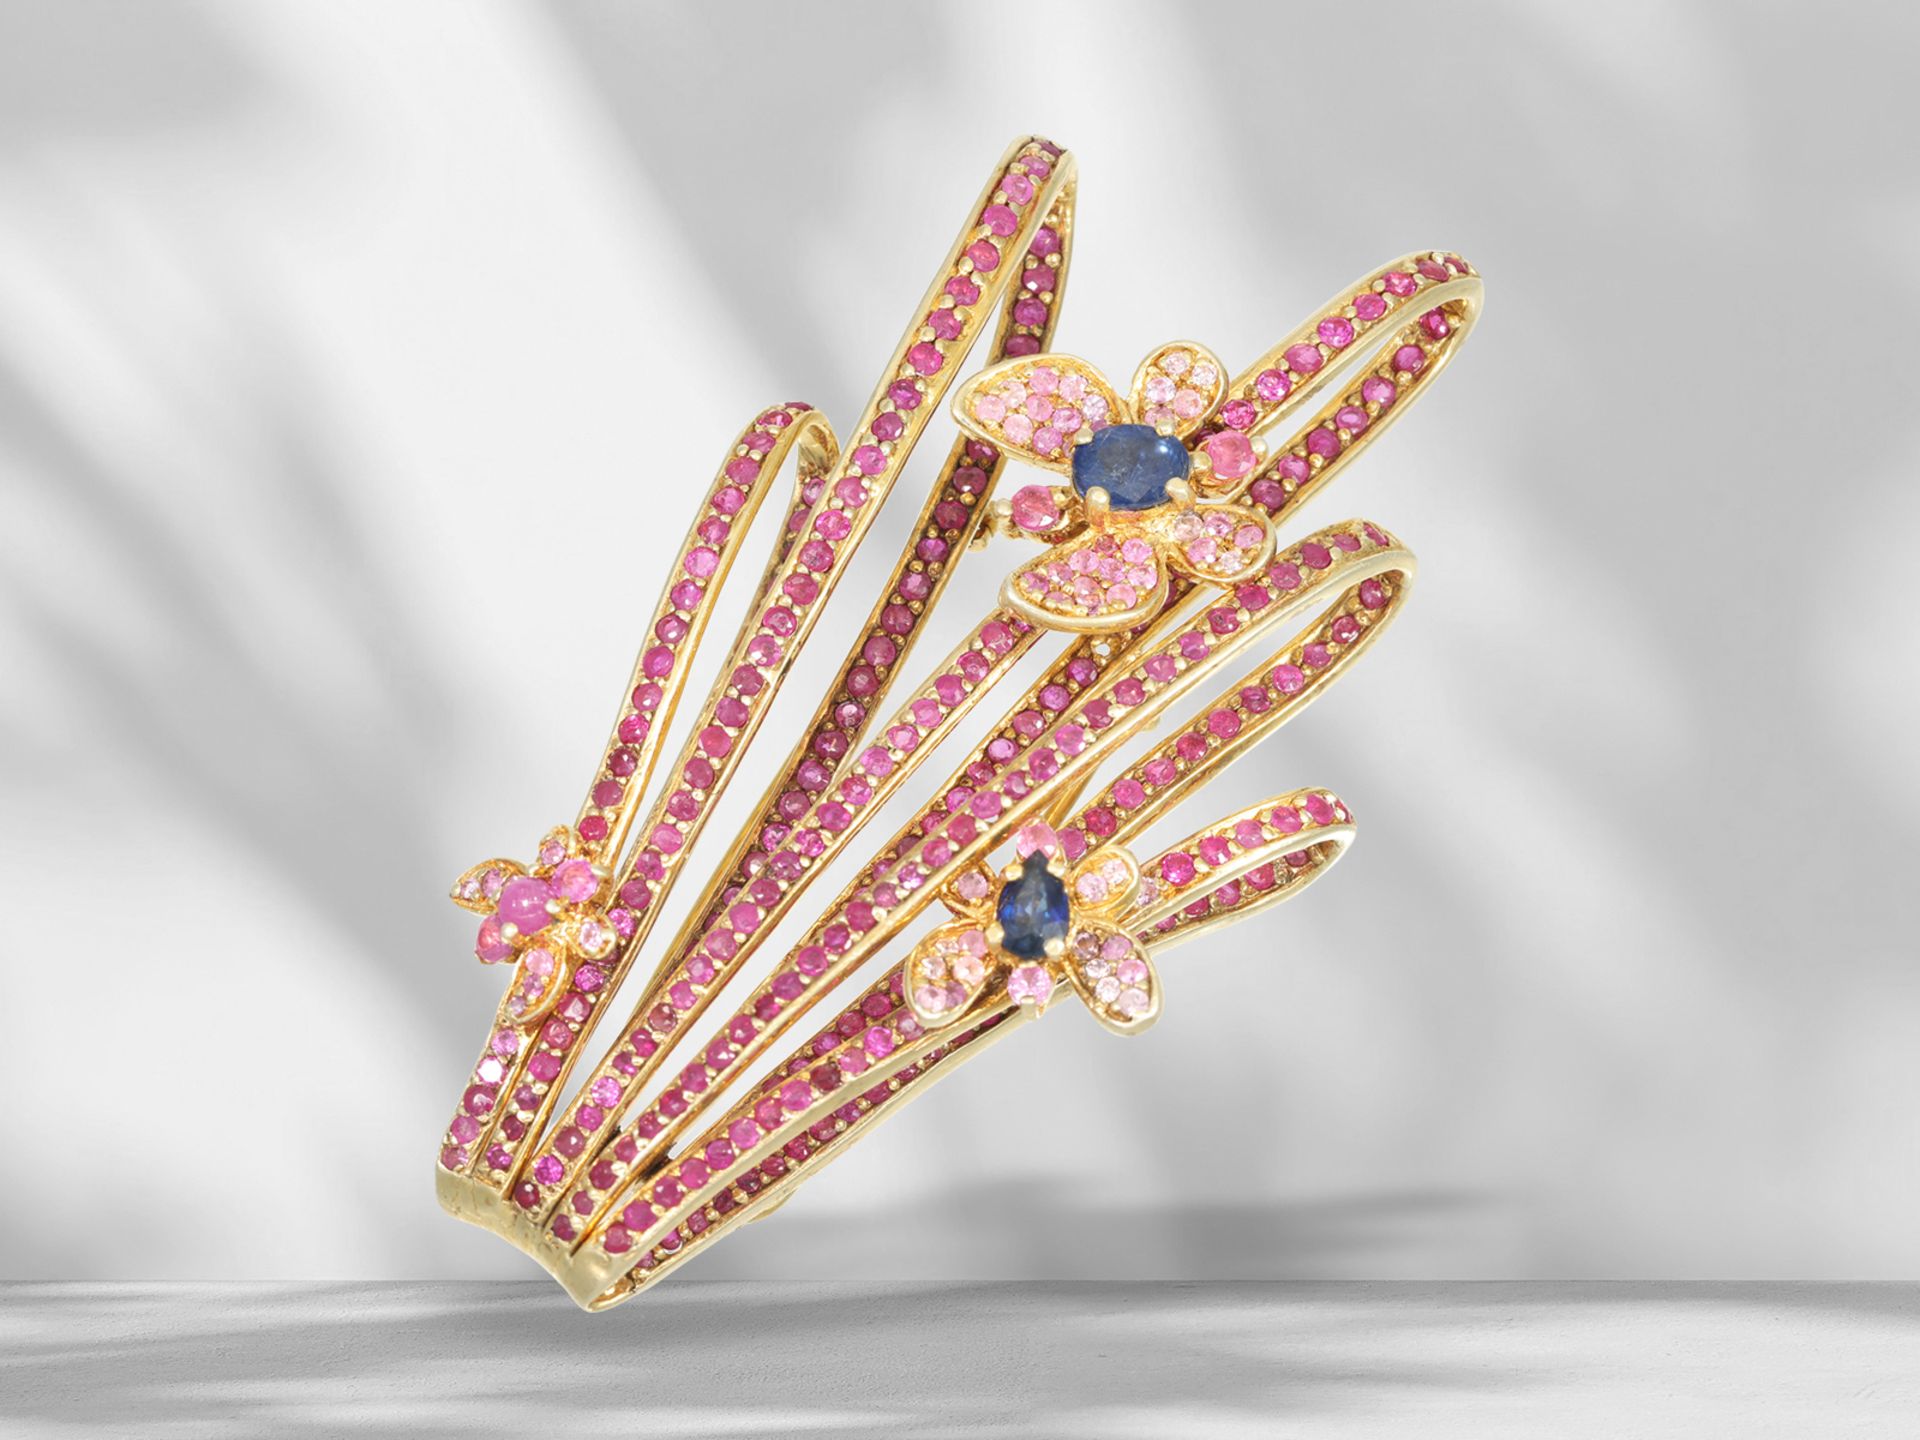 Extremely decorative designer brooch with sapphires and rubies, handmade from 925 silver gilt - Image 3 of 4